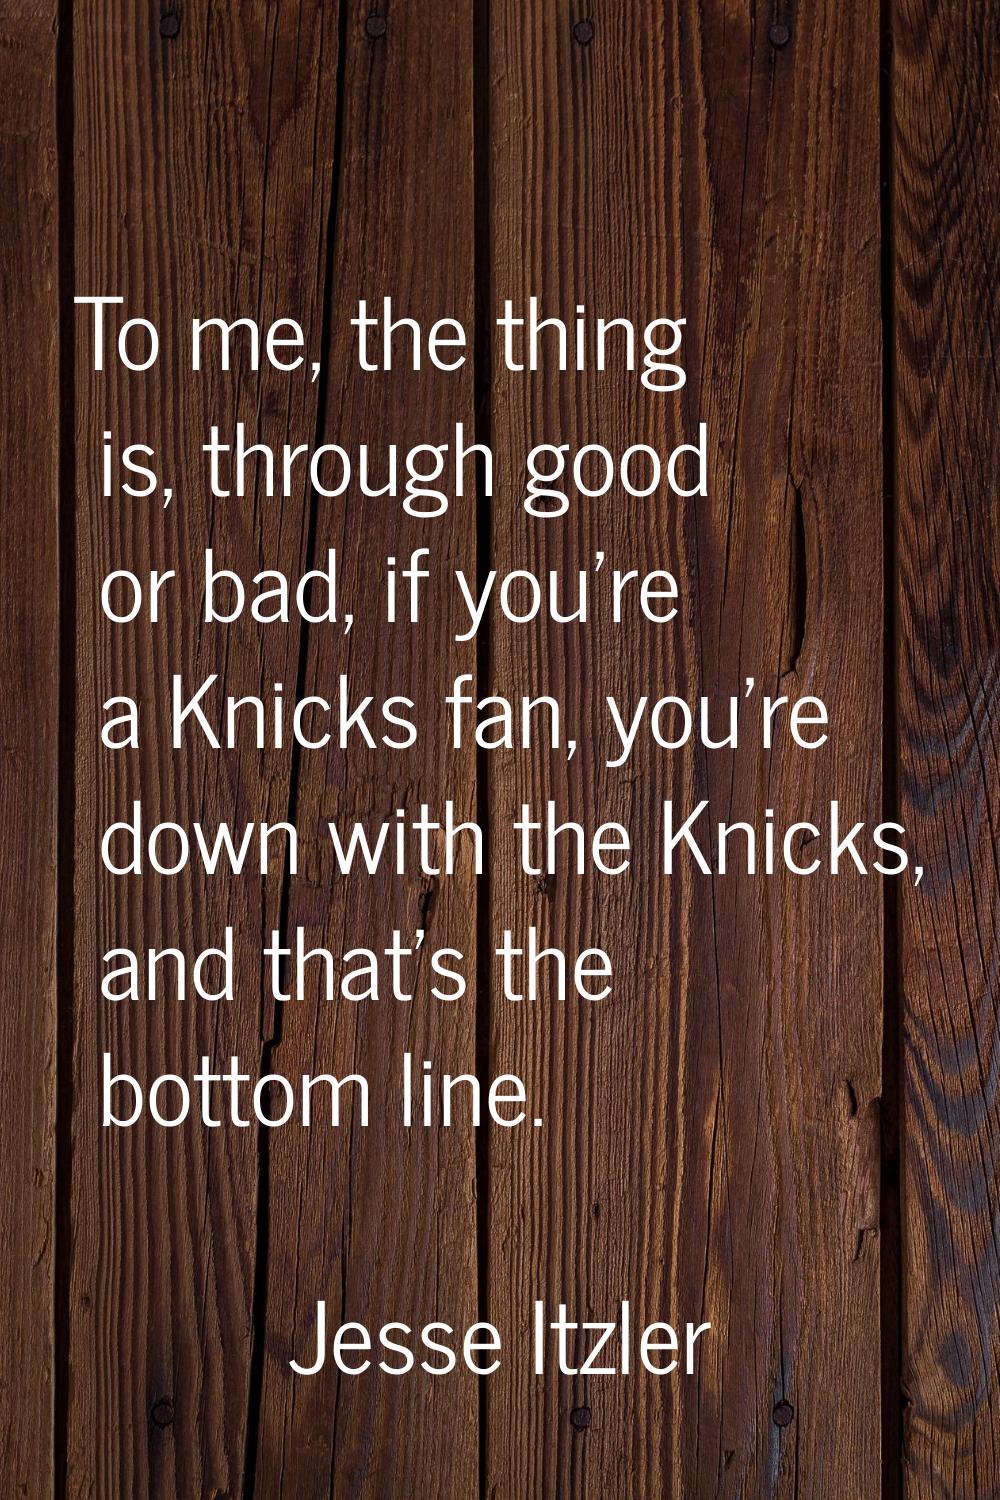 To me, the thing is, through good or bad, if you're a Knicks fan, you're down with the Knicks, and 